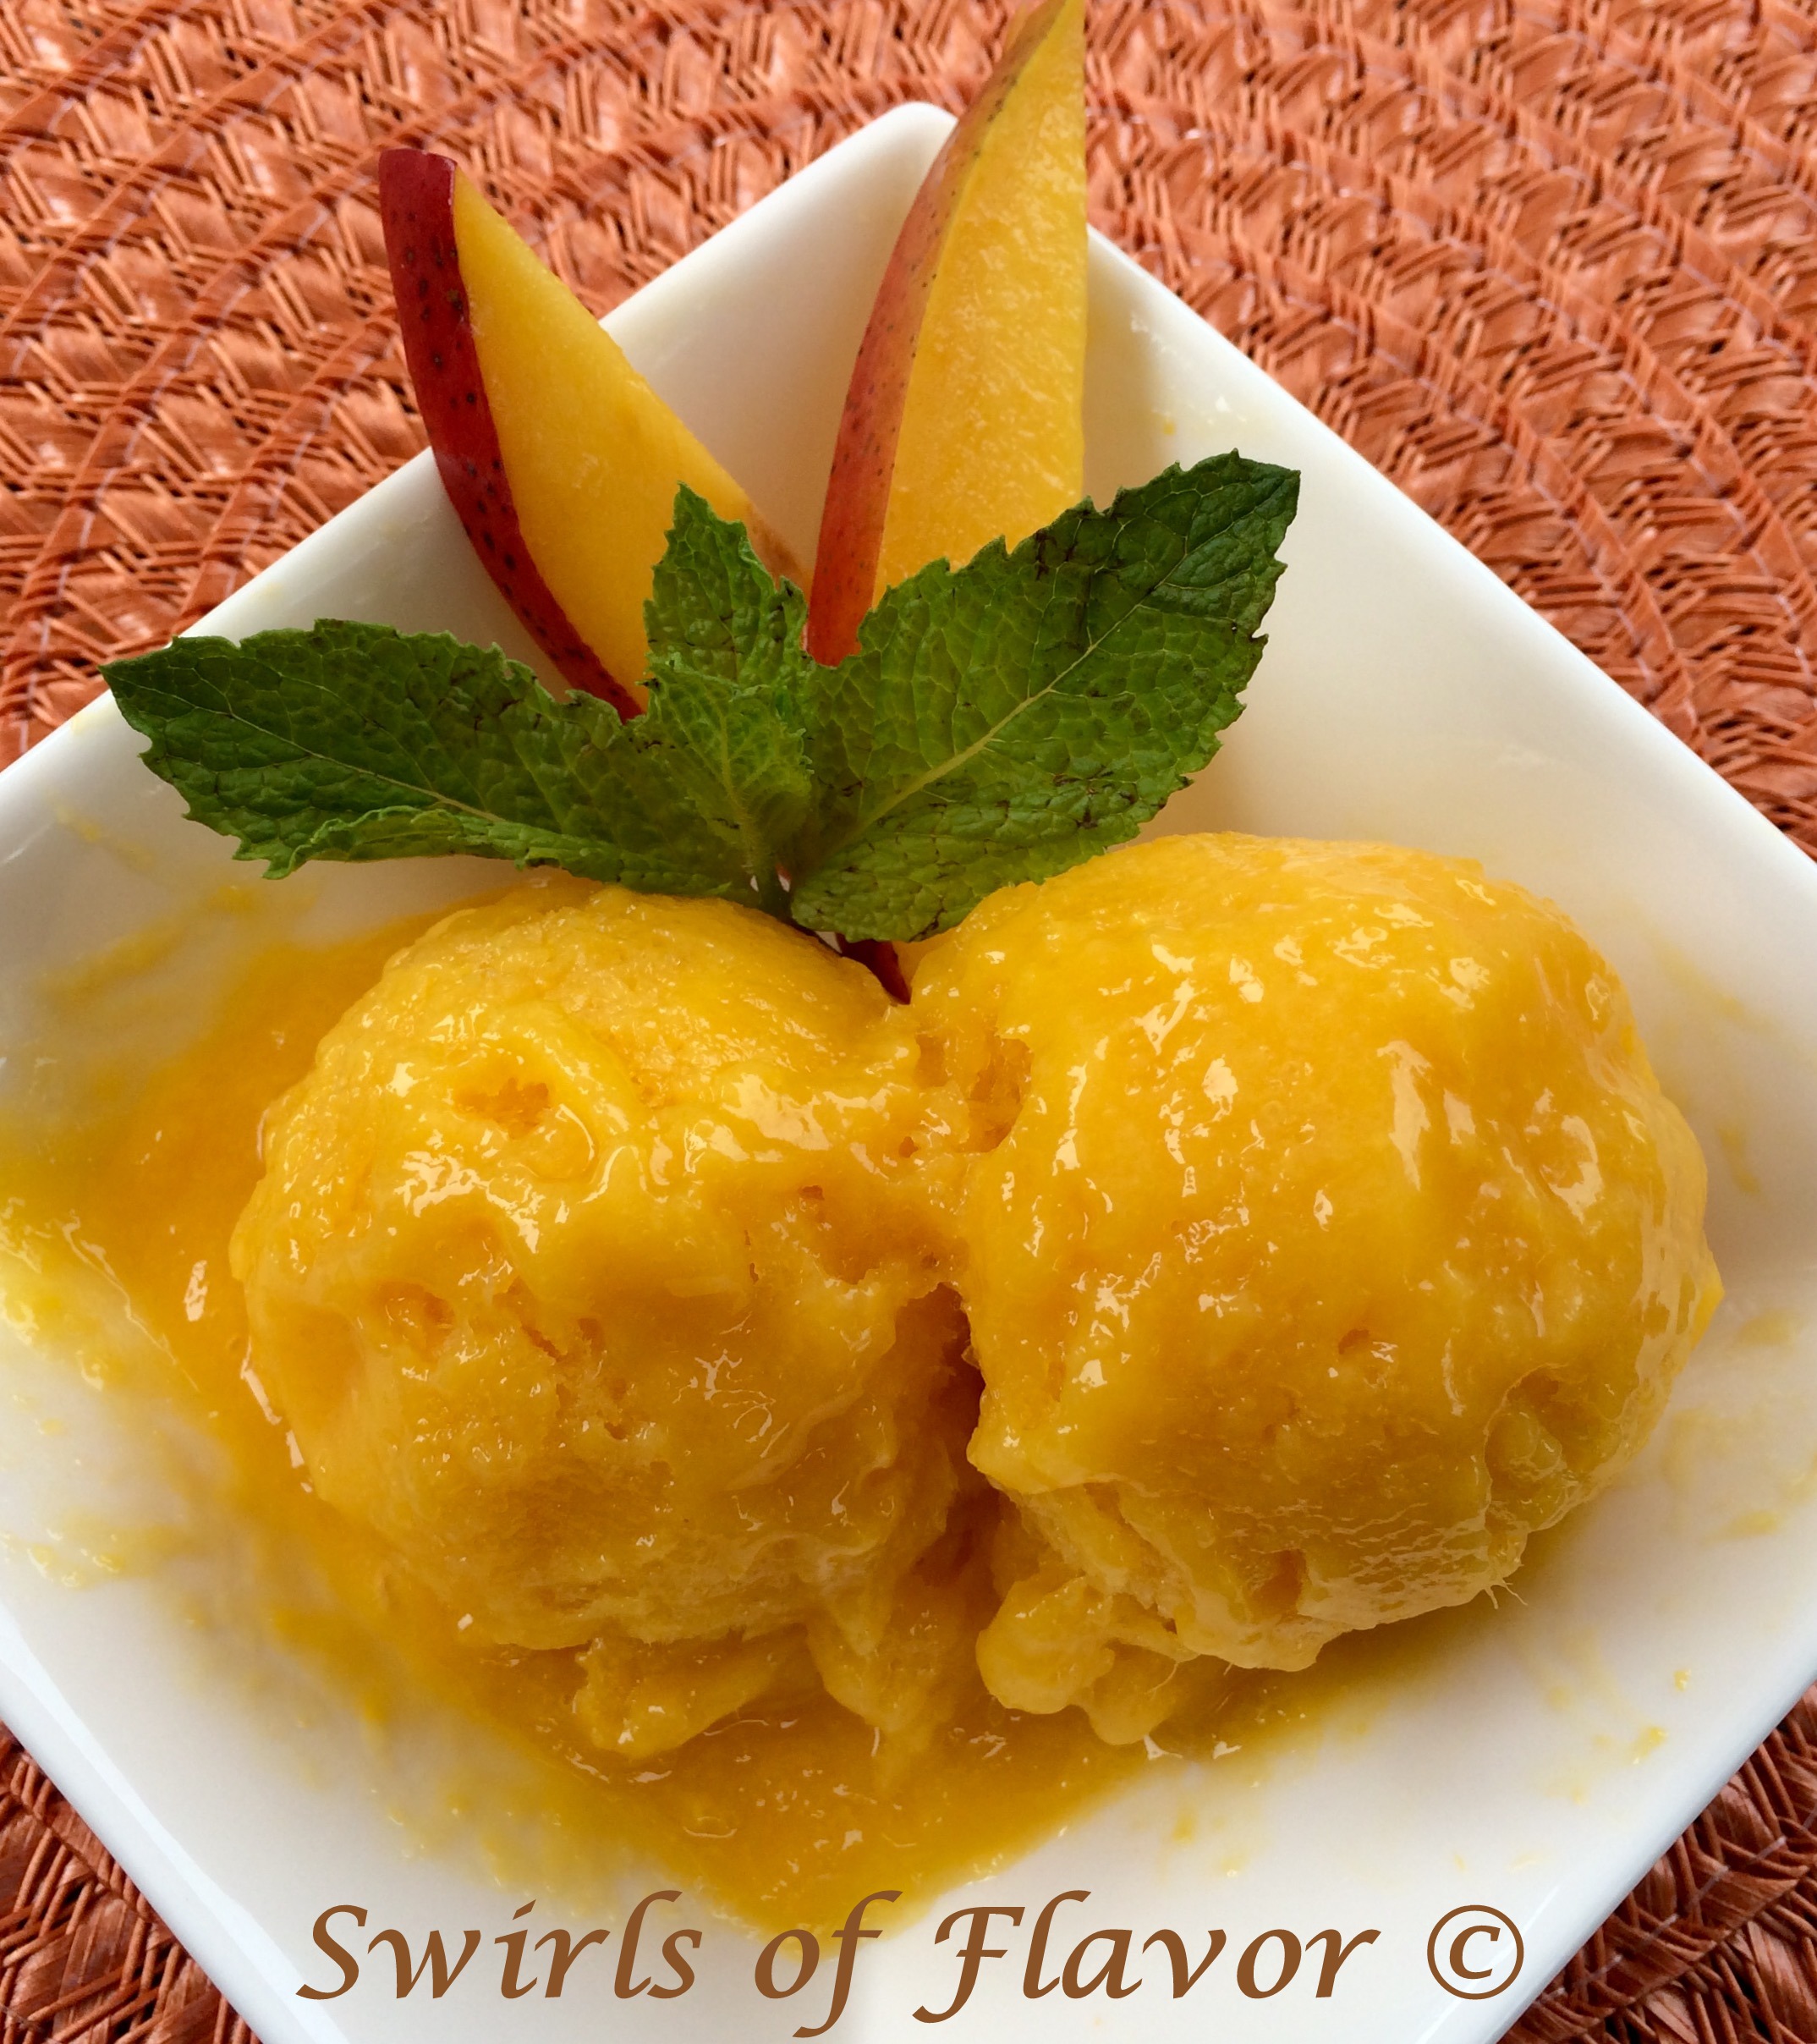 Mango Sorbet recipe in white dish with fresh mnt and mango slices